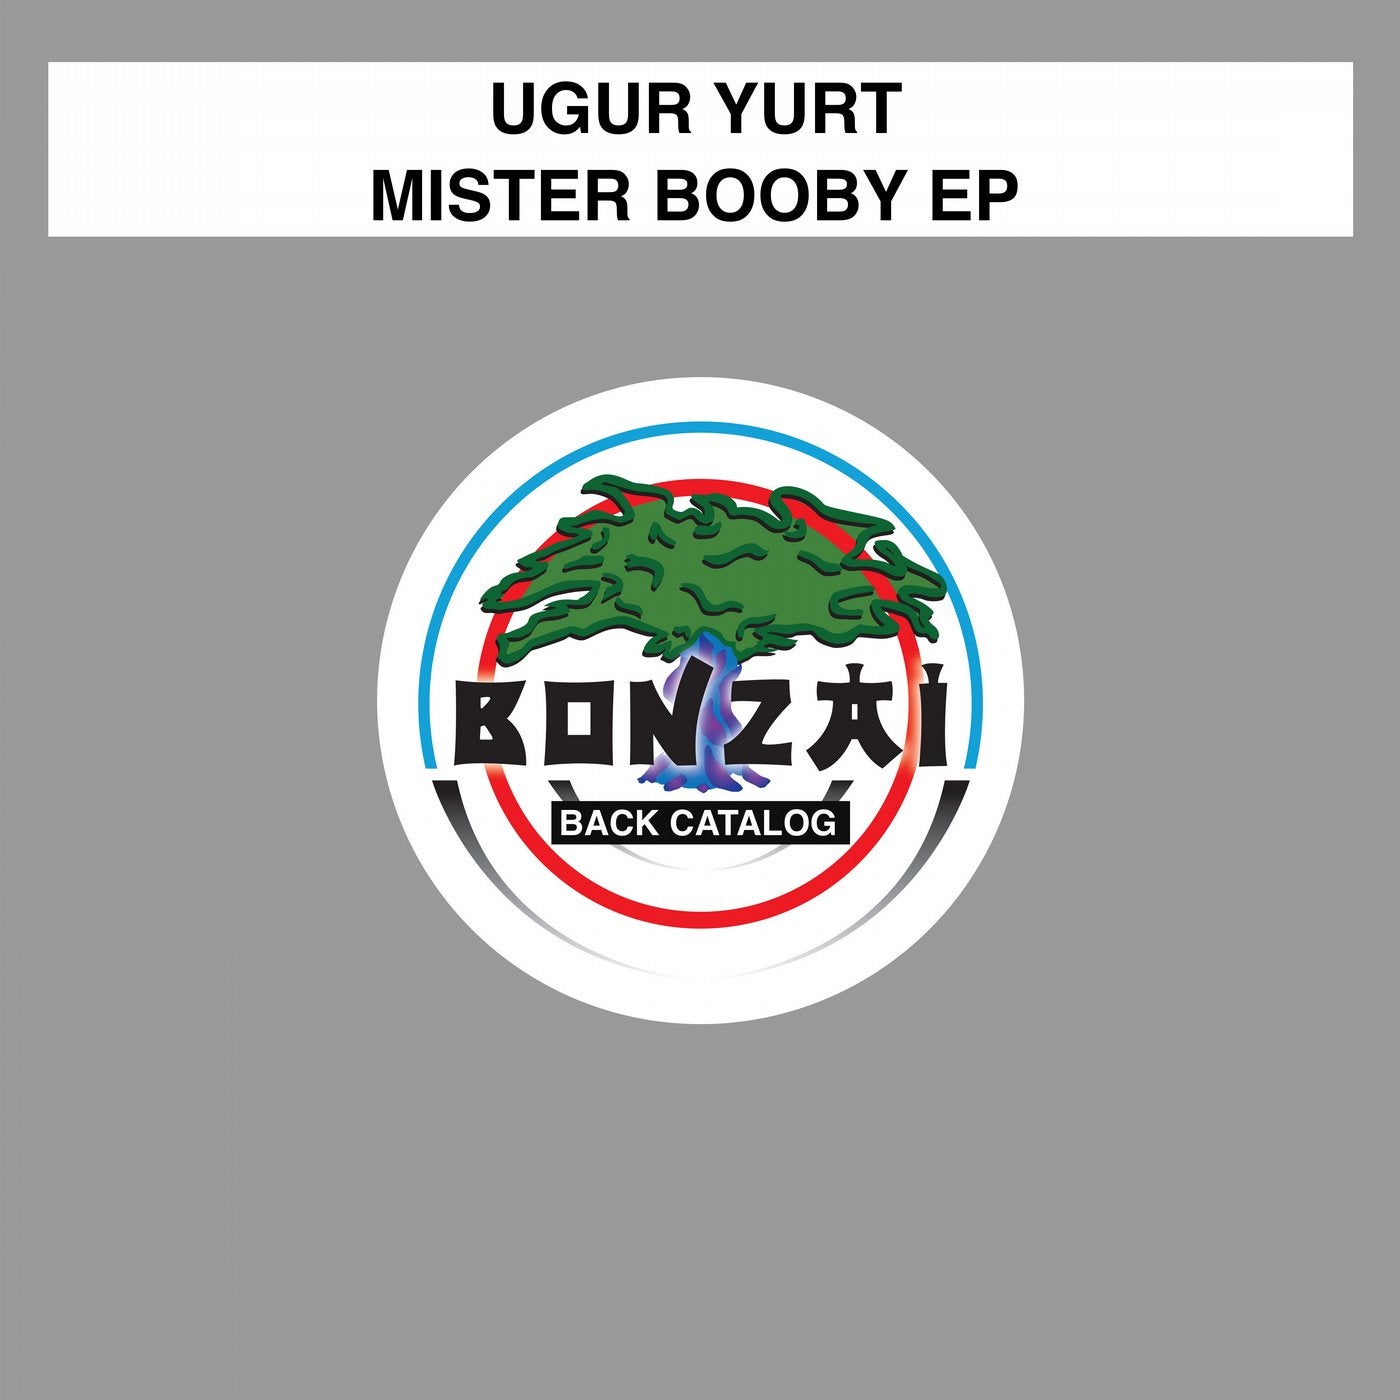 Mister Booby EP